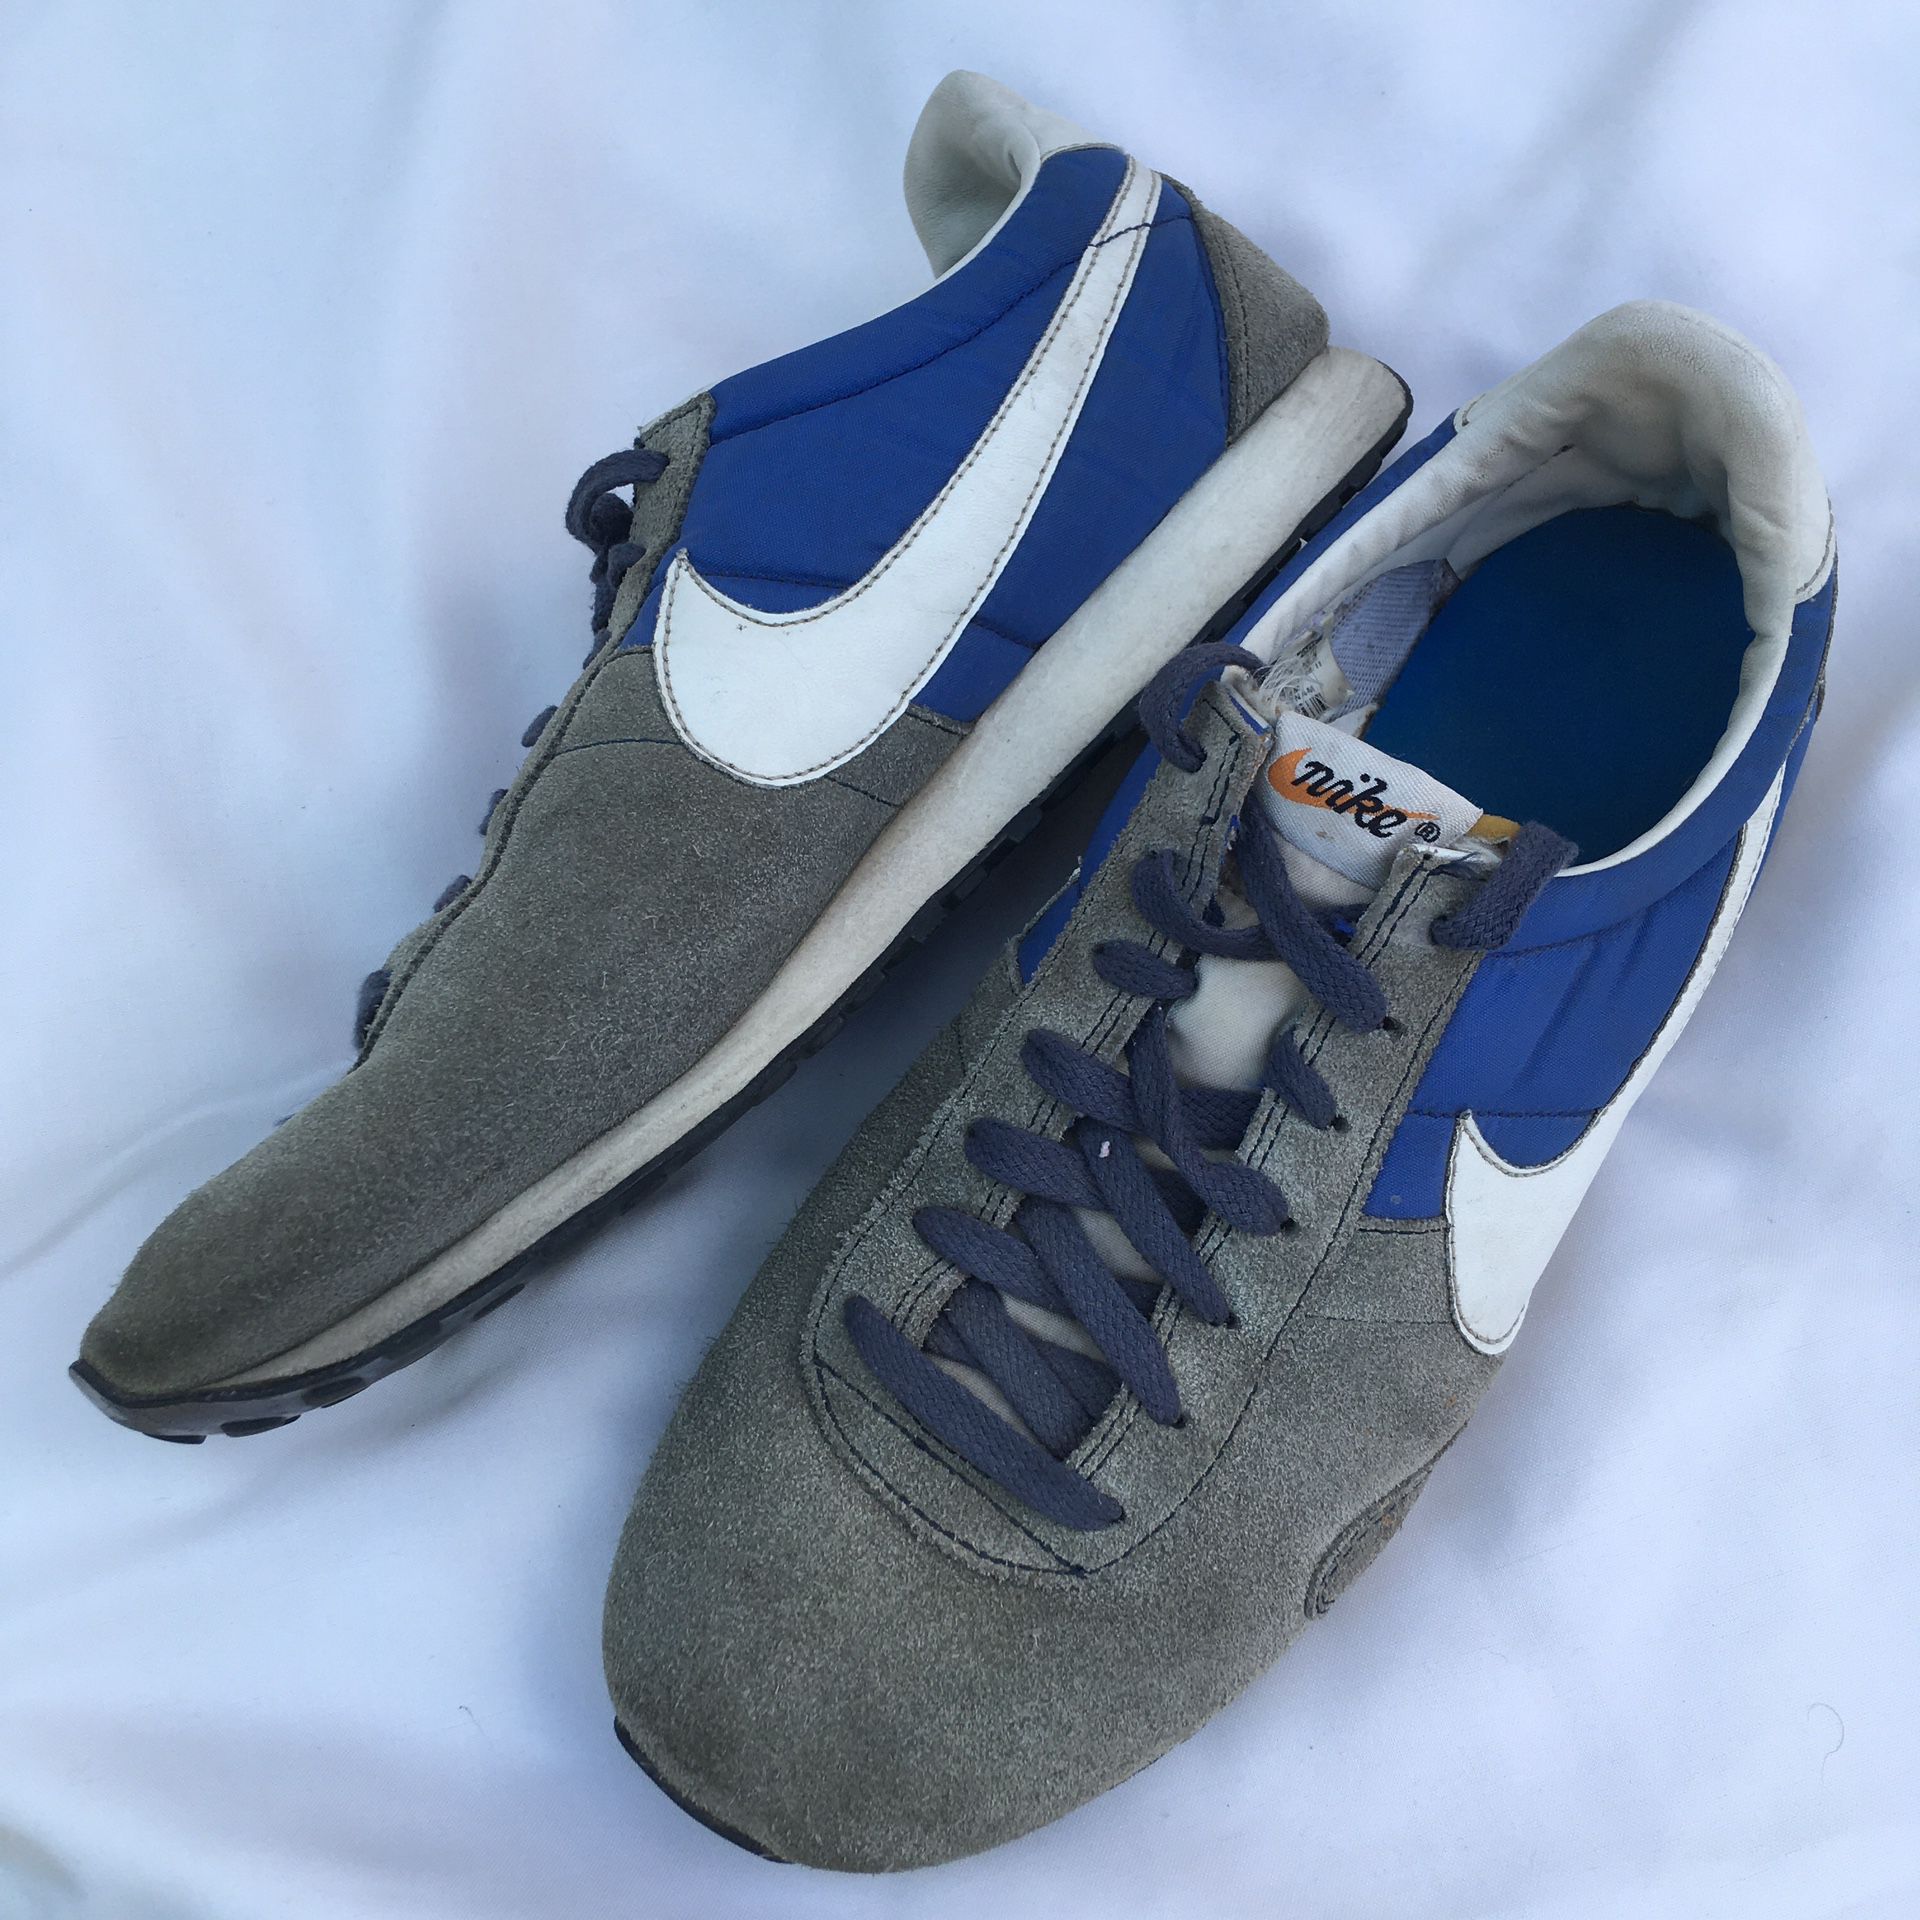 Nike pre Montreal racer shoes men's 10.5 waffle bottom blue 512538-419 for Sale in Norwalk, CA -